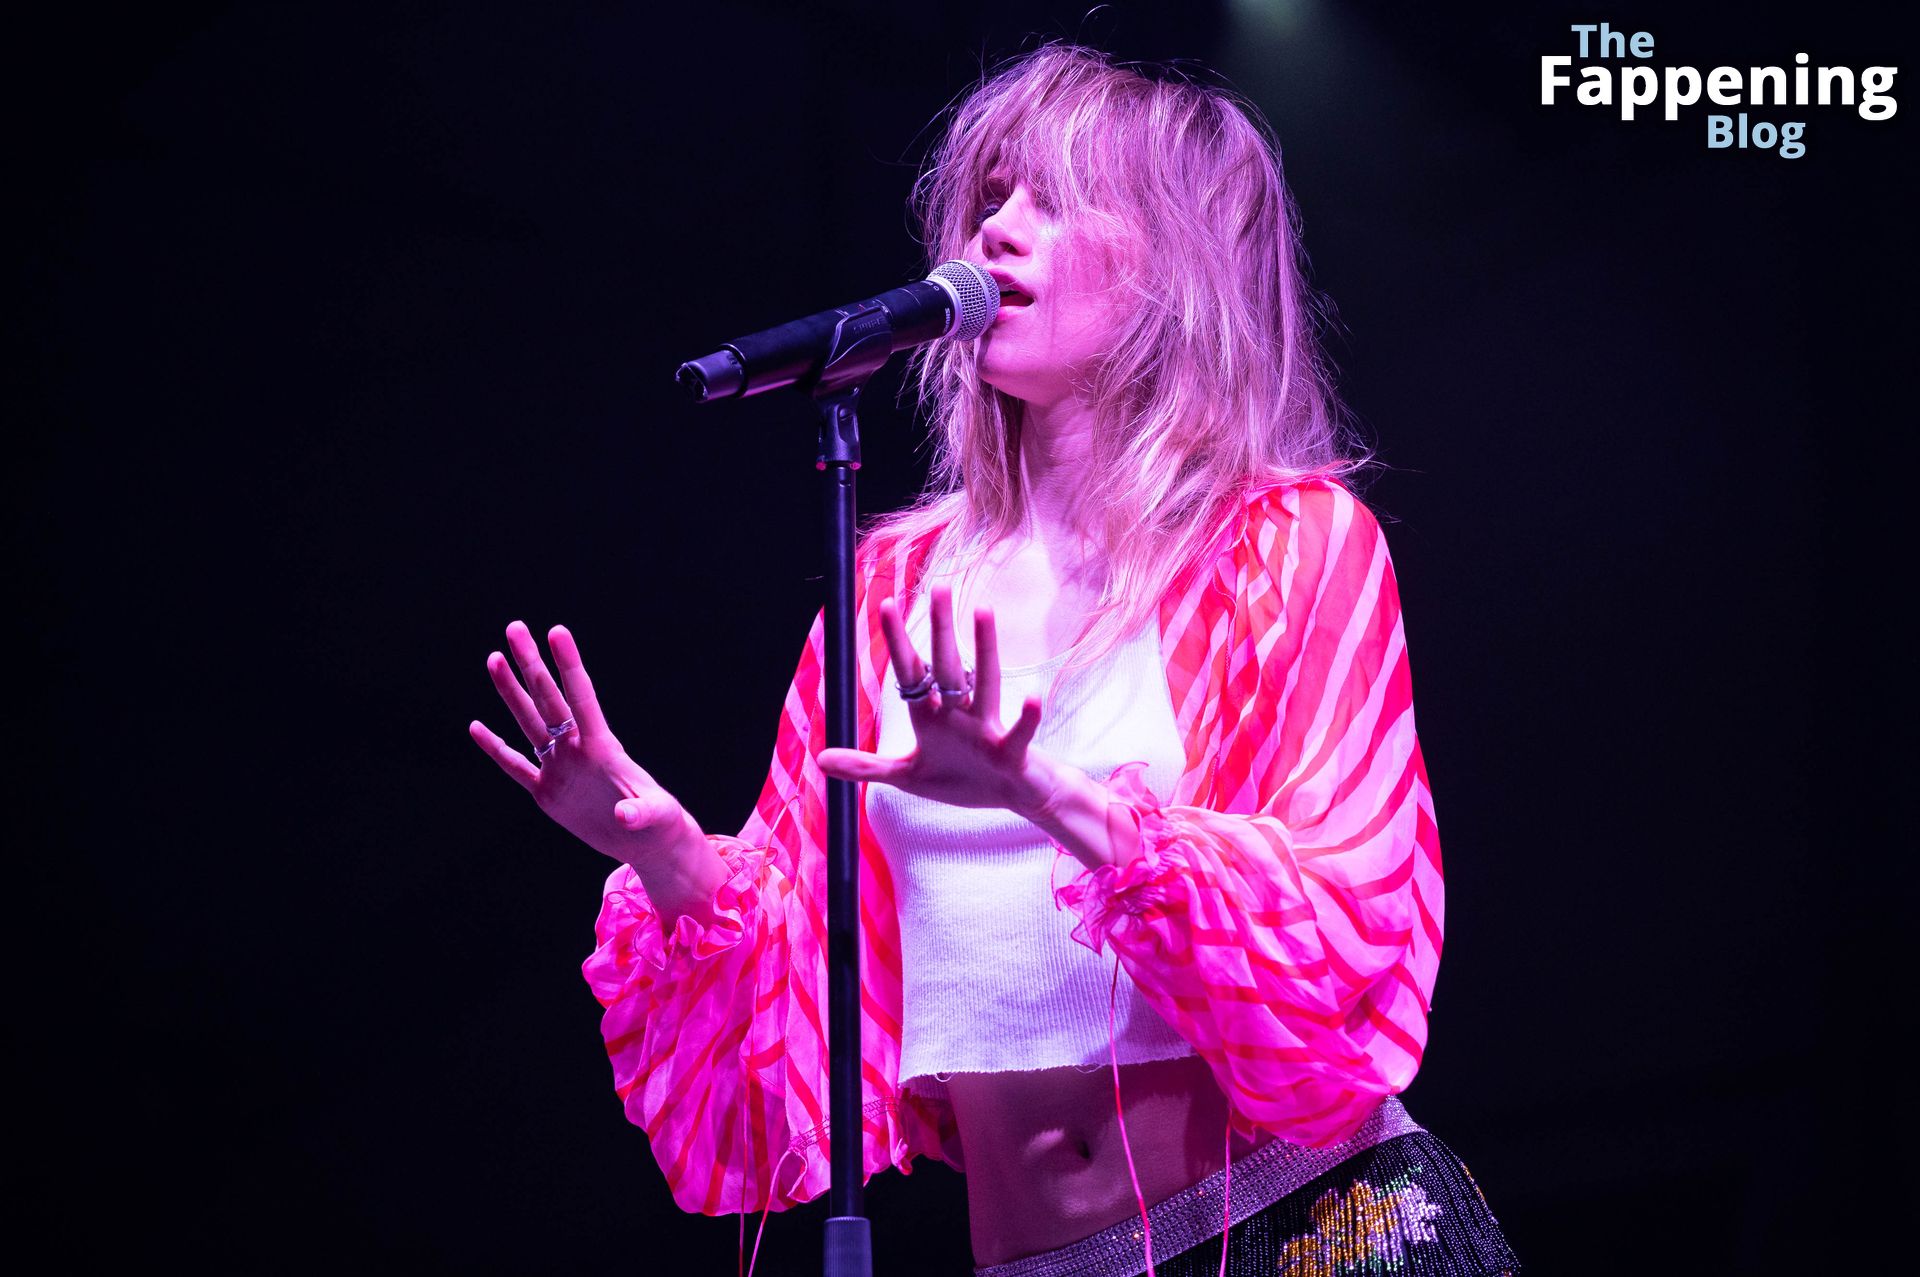 Suki Waterhouse Shows Off Her Pokies On Stage 35 Photos ͡° ͜ʖ ͡° The Fappening Frappening 